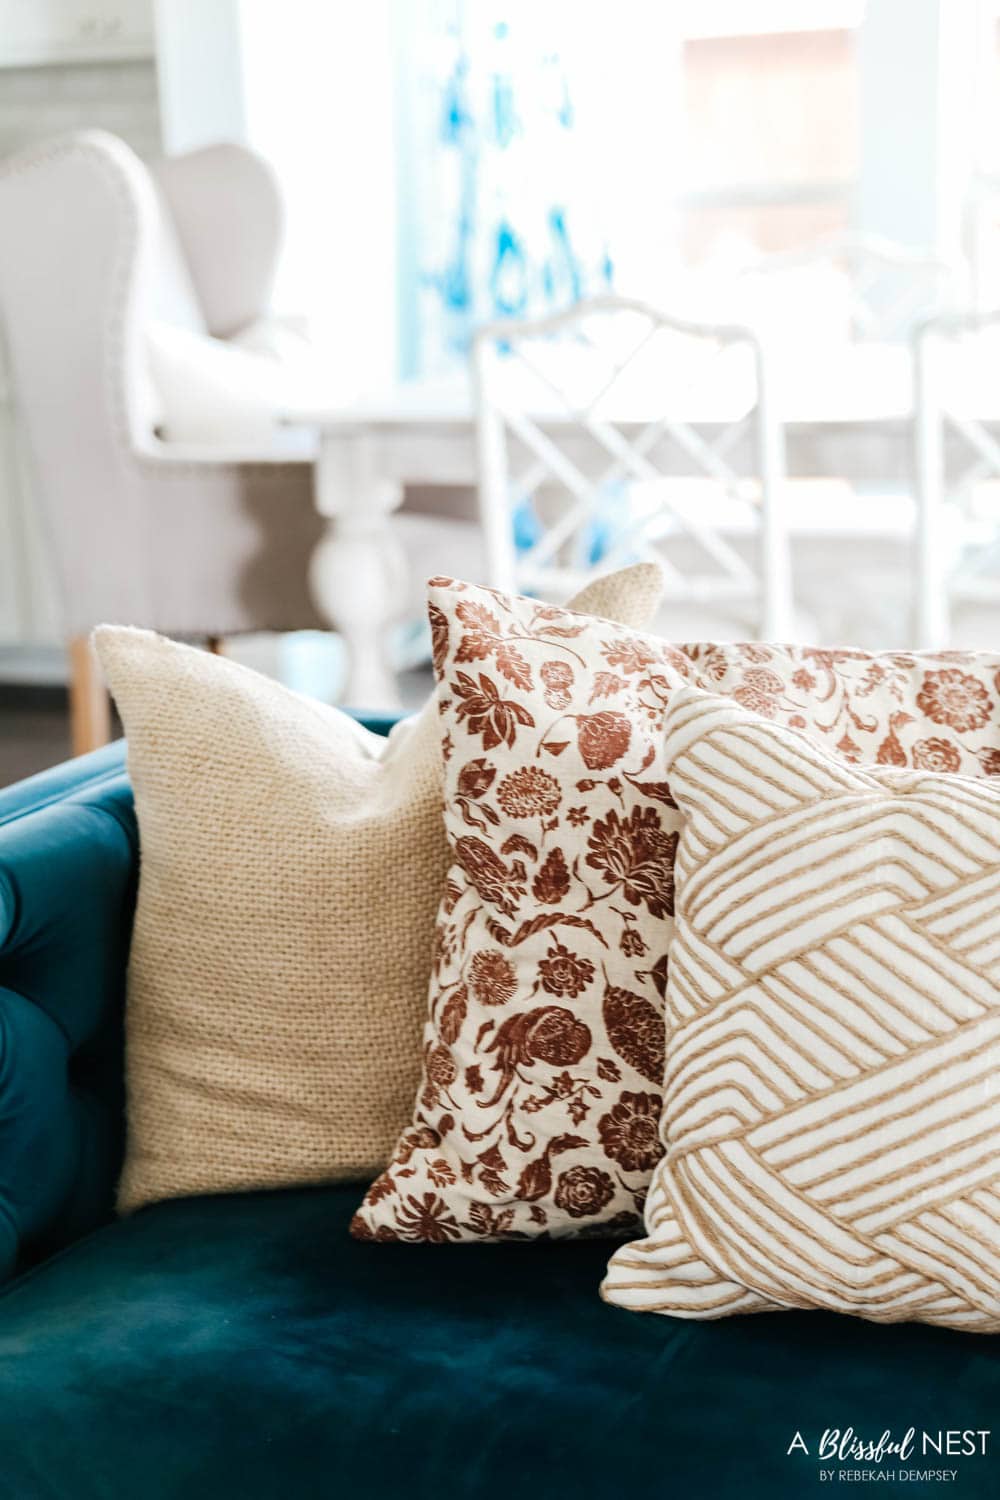 Switch out fabrics and pillows for jewel toned colors. #ABlissfulNest #falldecor #fallideas